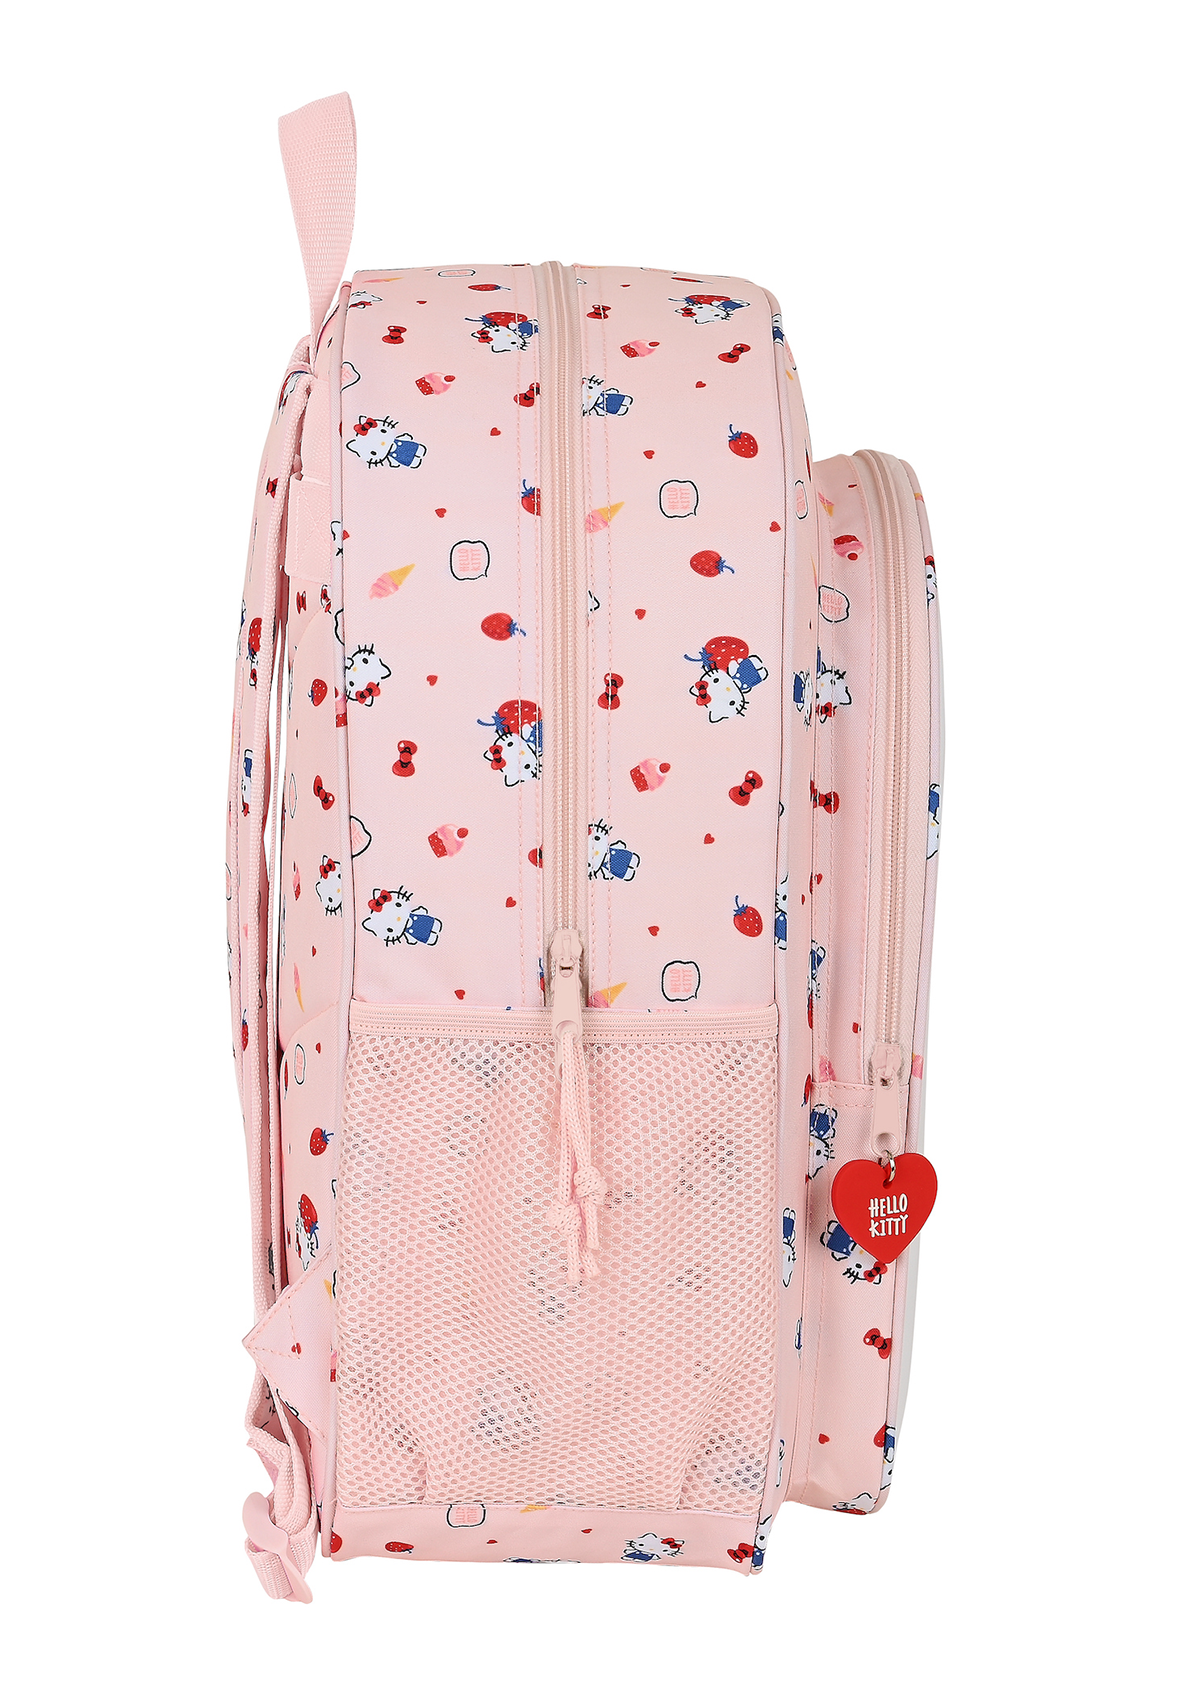 Hello Kitty Large Backpack